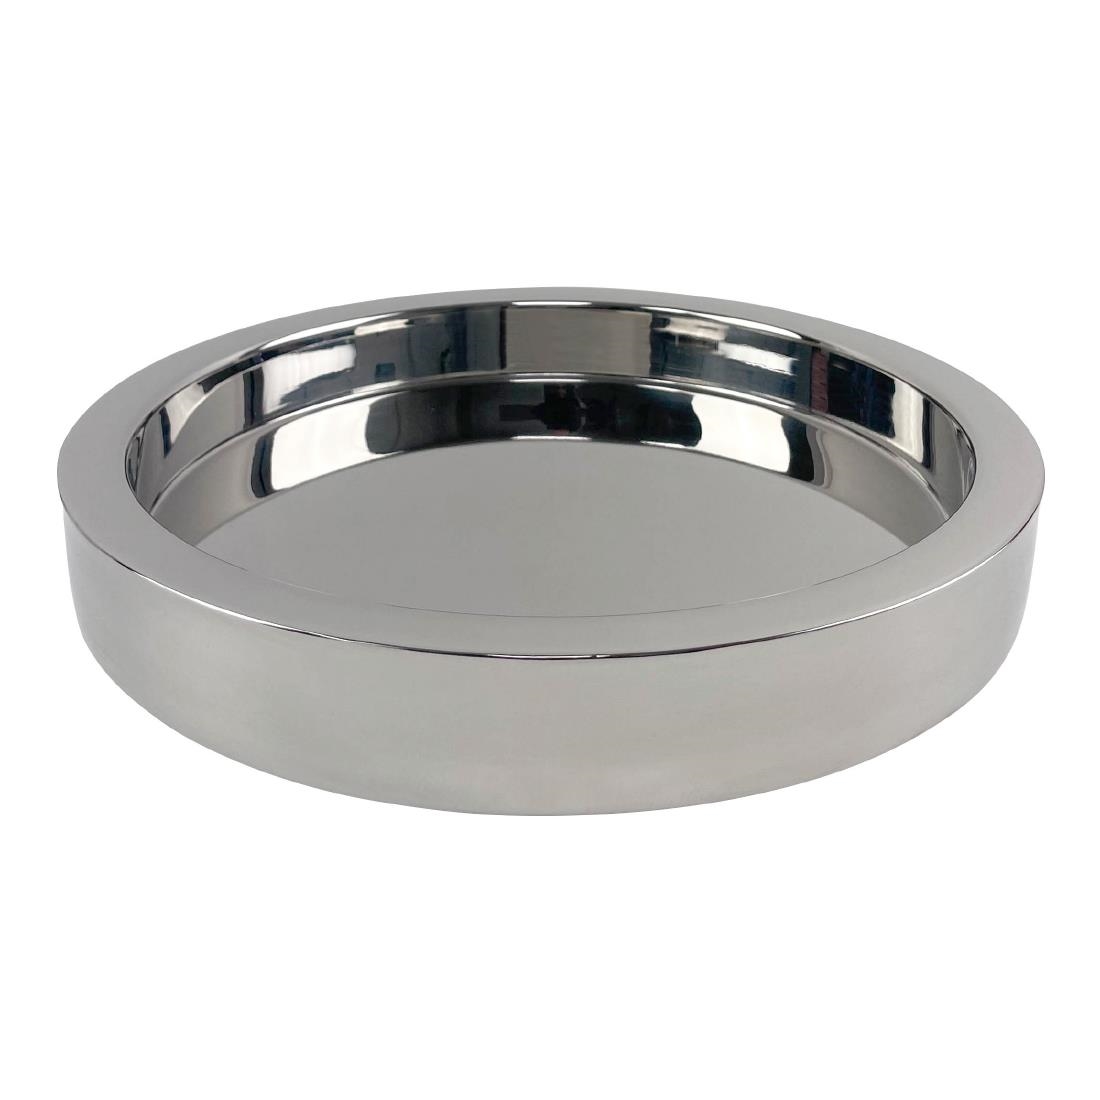 Beaumont Mirrored Double Walled Waiters Tray 355mm (CZ674)